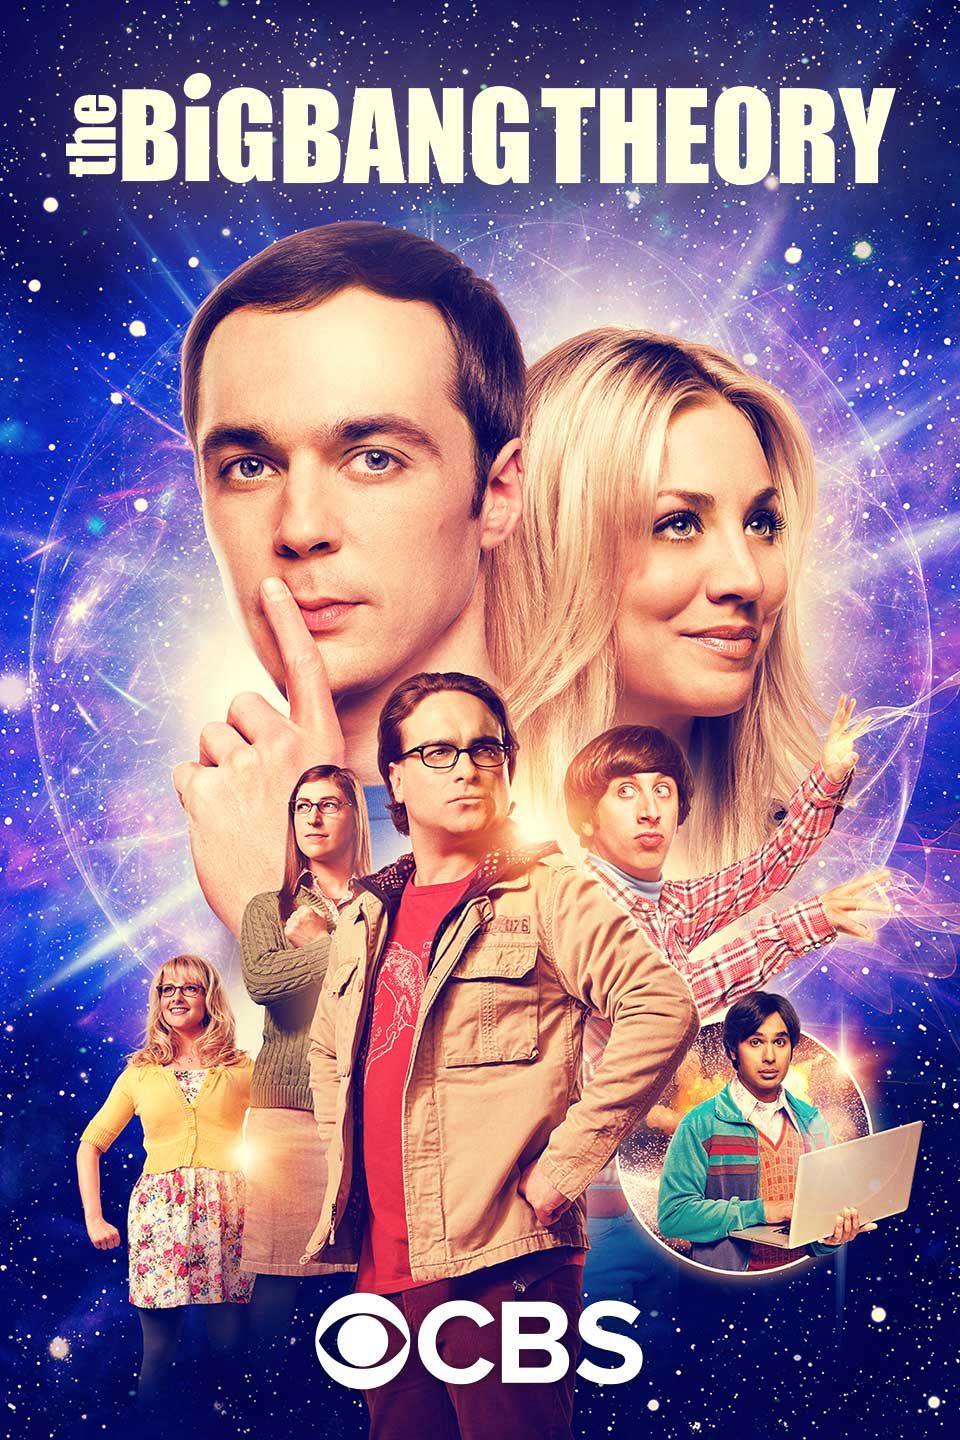 Watch the Big Bang Theory scene that's been BANNED from TV for